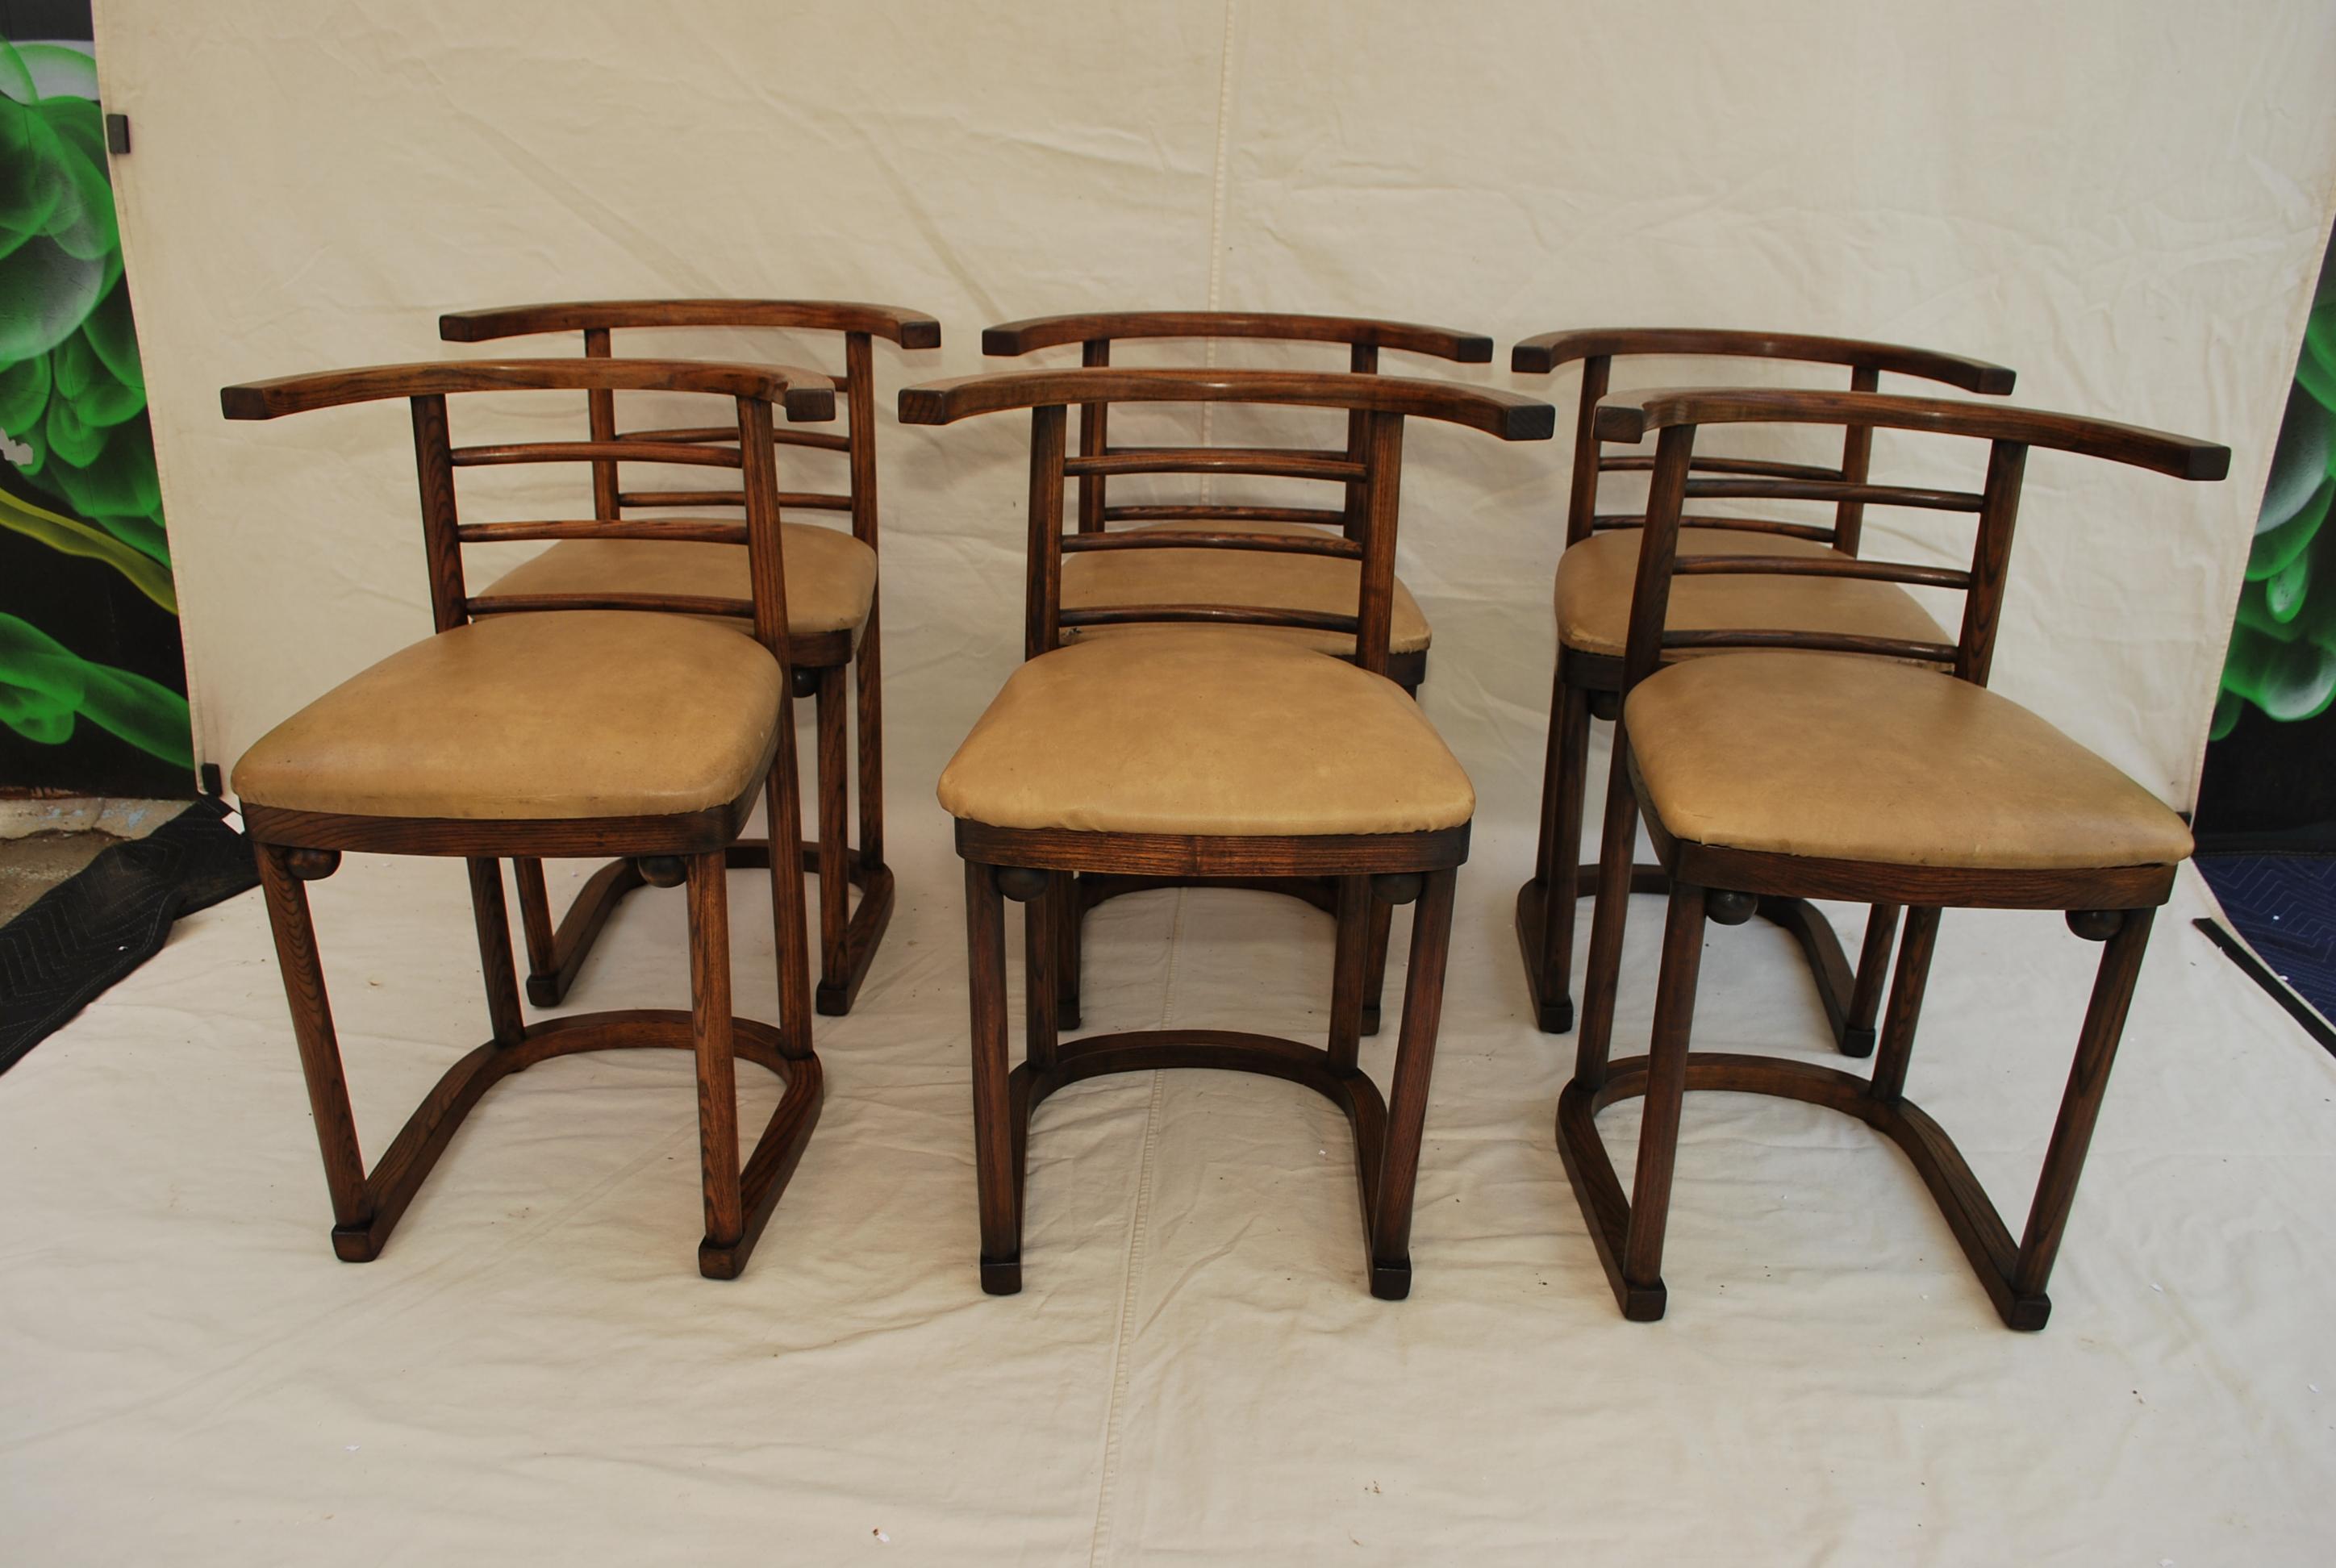 A beautiful set of six 1940's cabaret chairs design by Josef Hoffmann, for toanet made of oak wood, the patina is much nicer in person